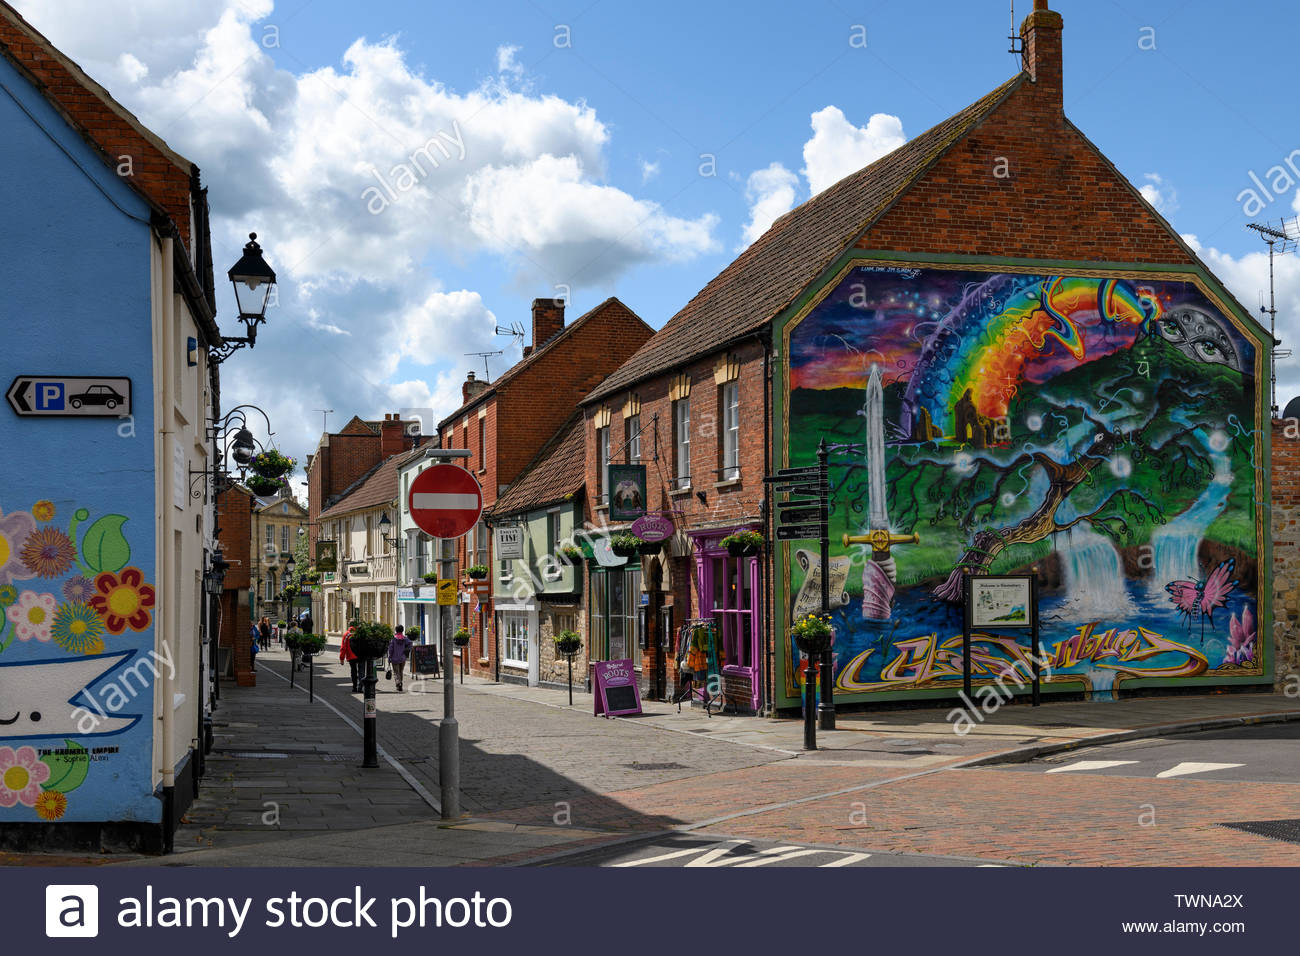 Image result for glastonbury town psychedelic